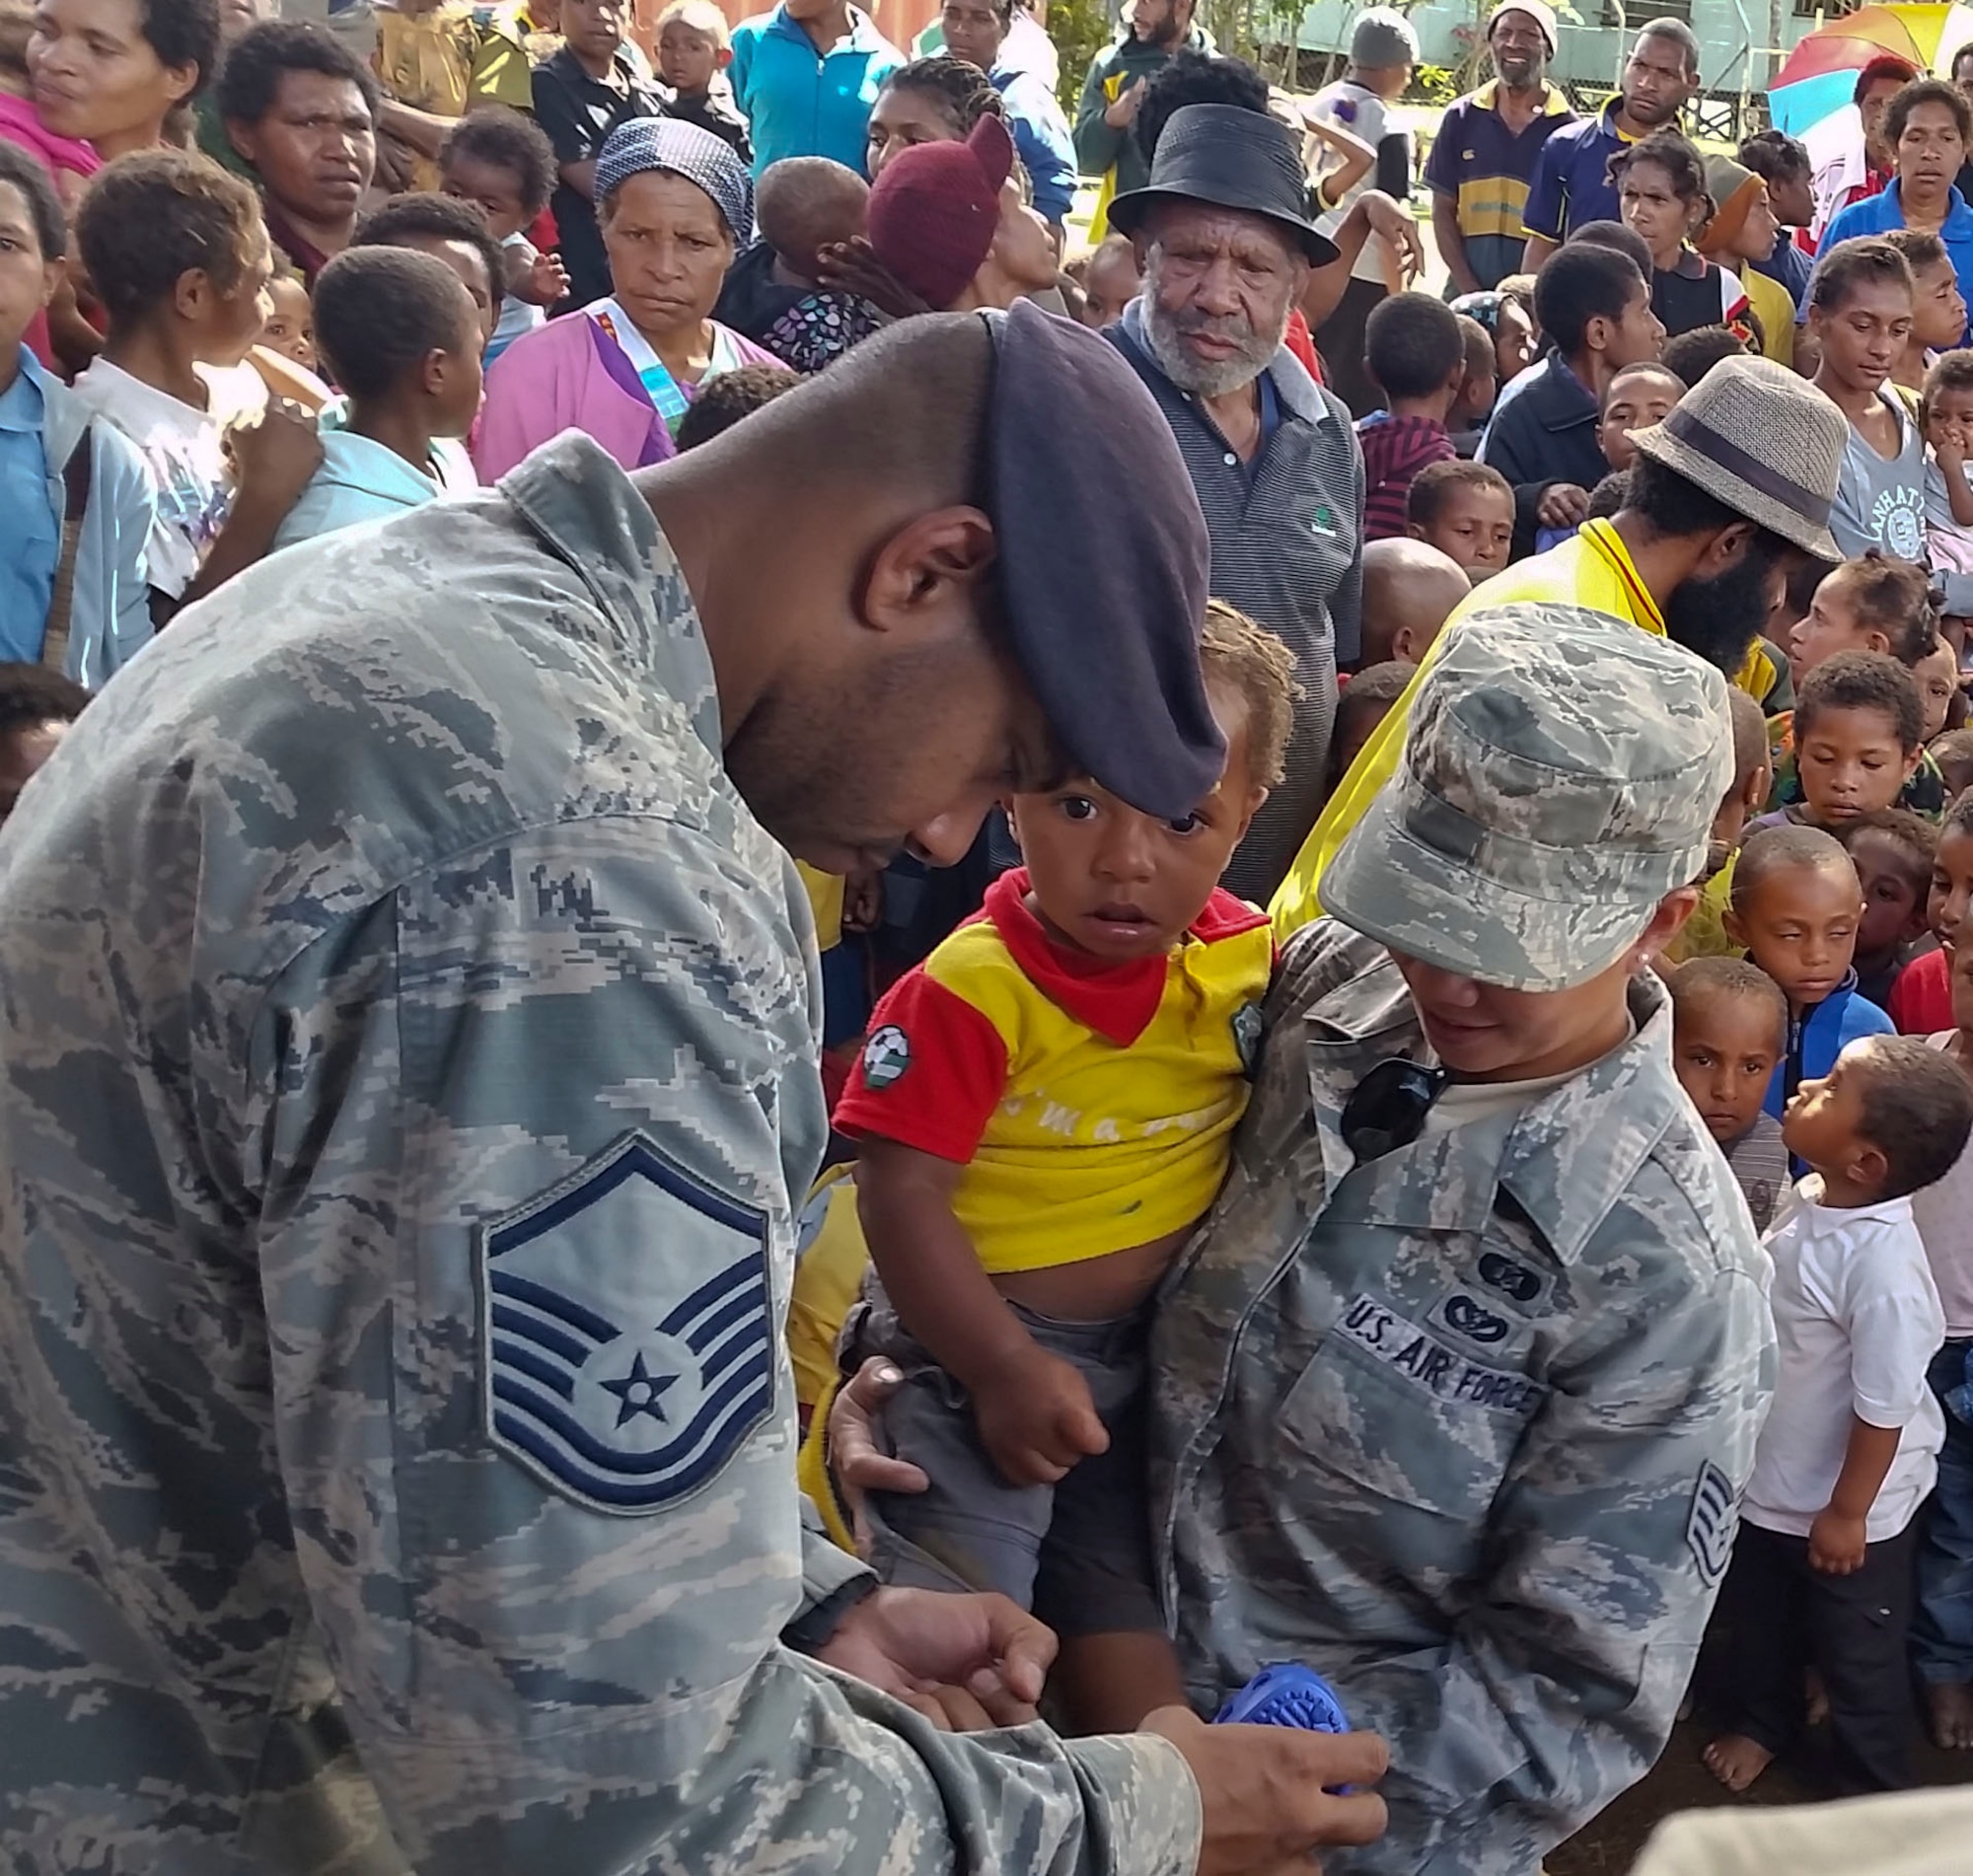 Master Sgt. Jamain Braxton, the anti-terrorism officer for Pacific Unity 14-8 deployed from Andersen Air Force Base, Guam, tries a pair of shoes on a child during a shoe drive for the local community of Mount Hagen, Papua New Guinea, Sept. 8, 2014. While deployed in support of Pacific Unity Braxton organized the shoe drive to benefit children in the community. Pacific Unity helps cultivate common bonds and foster goodwill between the U.S. and regional nations through multilateral humanitarian assistance and civil military operations. (U.S. Air Force photo by Airman 1st Class Jaimie Aquino/Released)